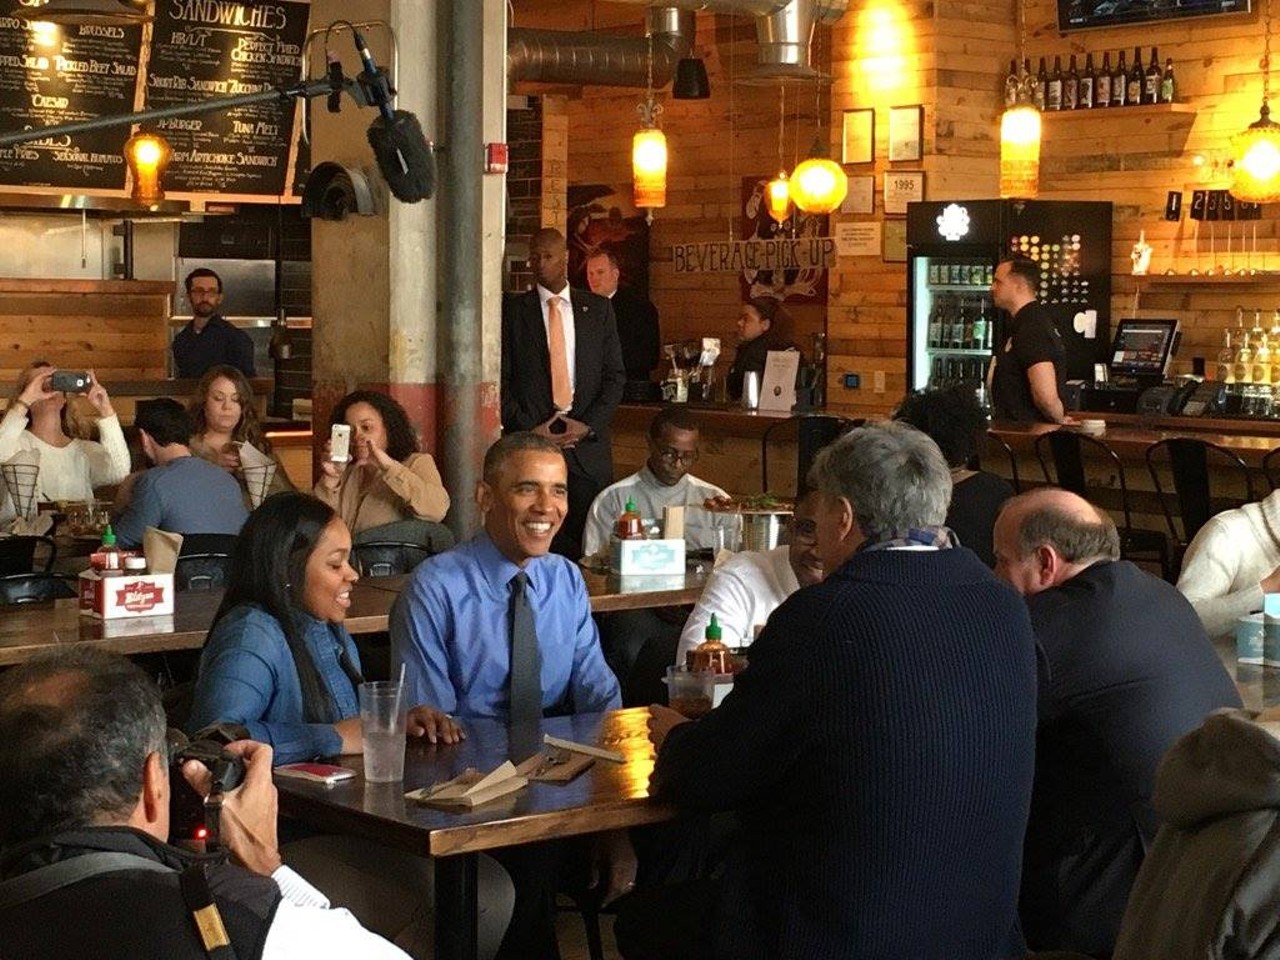  Obama had a meal at the Jolly Pumpkin in Midtown and you can sit there because there's a plaque 
Even Presidents need some good pub food.  After visiting Detroit to discuss the Flint Water Crisis and the state of the auto industry, former President Barack Obama got food bloggers worked up after stopping here for a bite.  Obama  had this to say about his food, "The Jolly Pumpkin, that was tasty stuff." He also snagged a Shinola watch during his visit.
Photo credit via  Facebook 